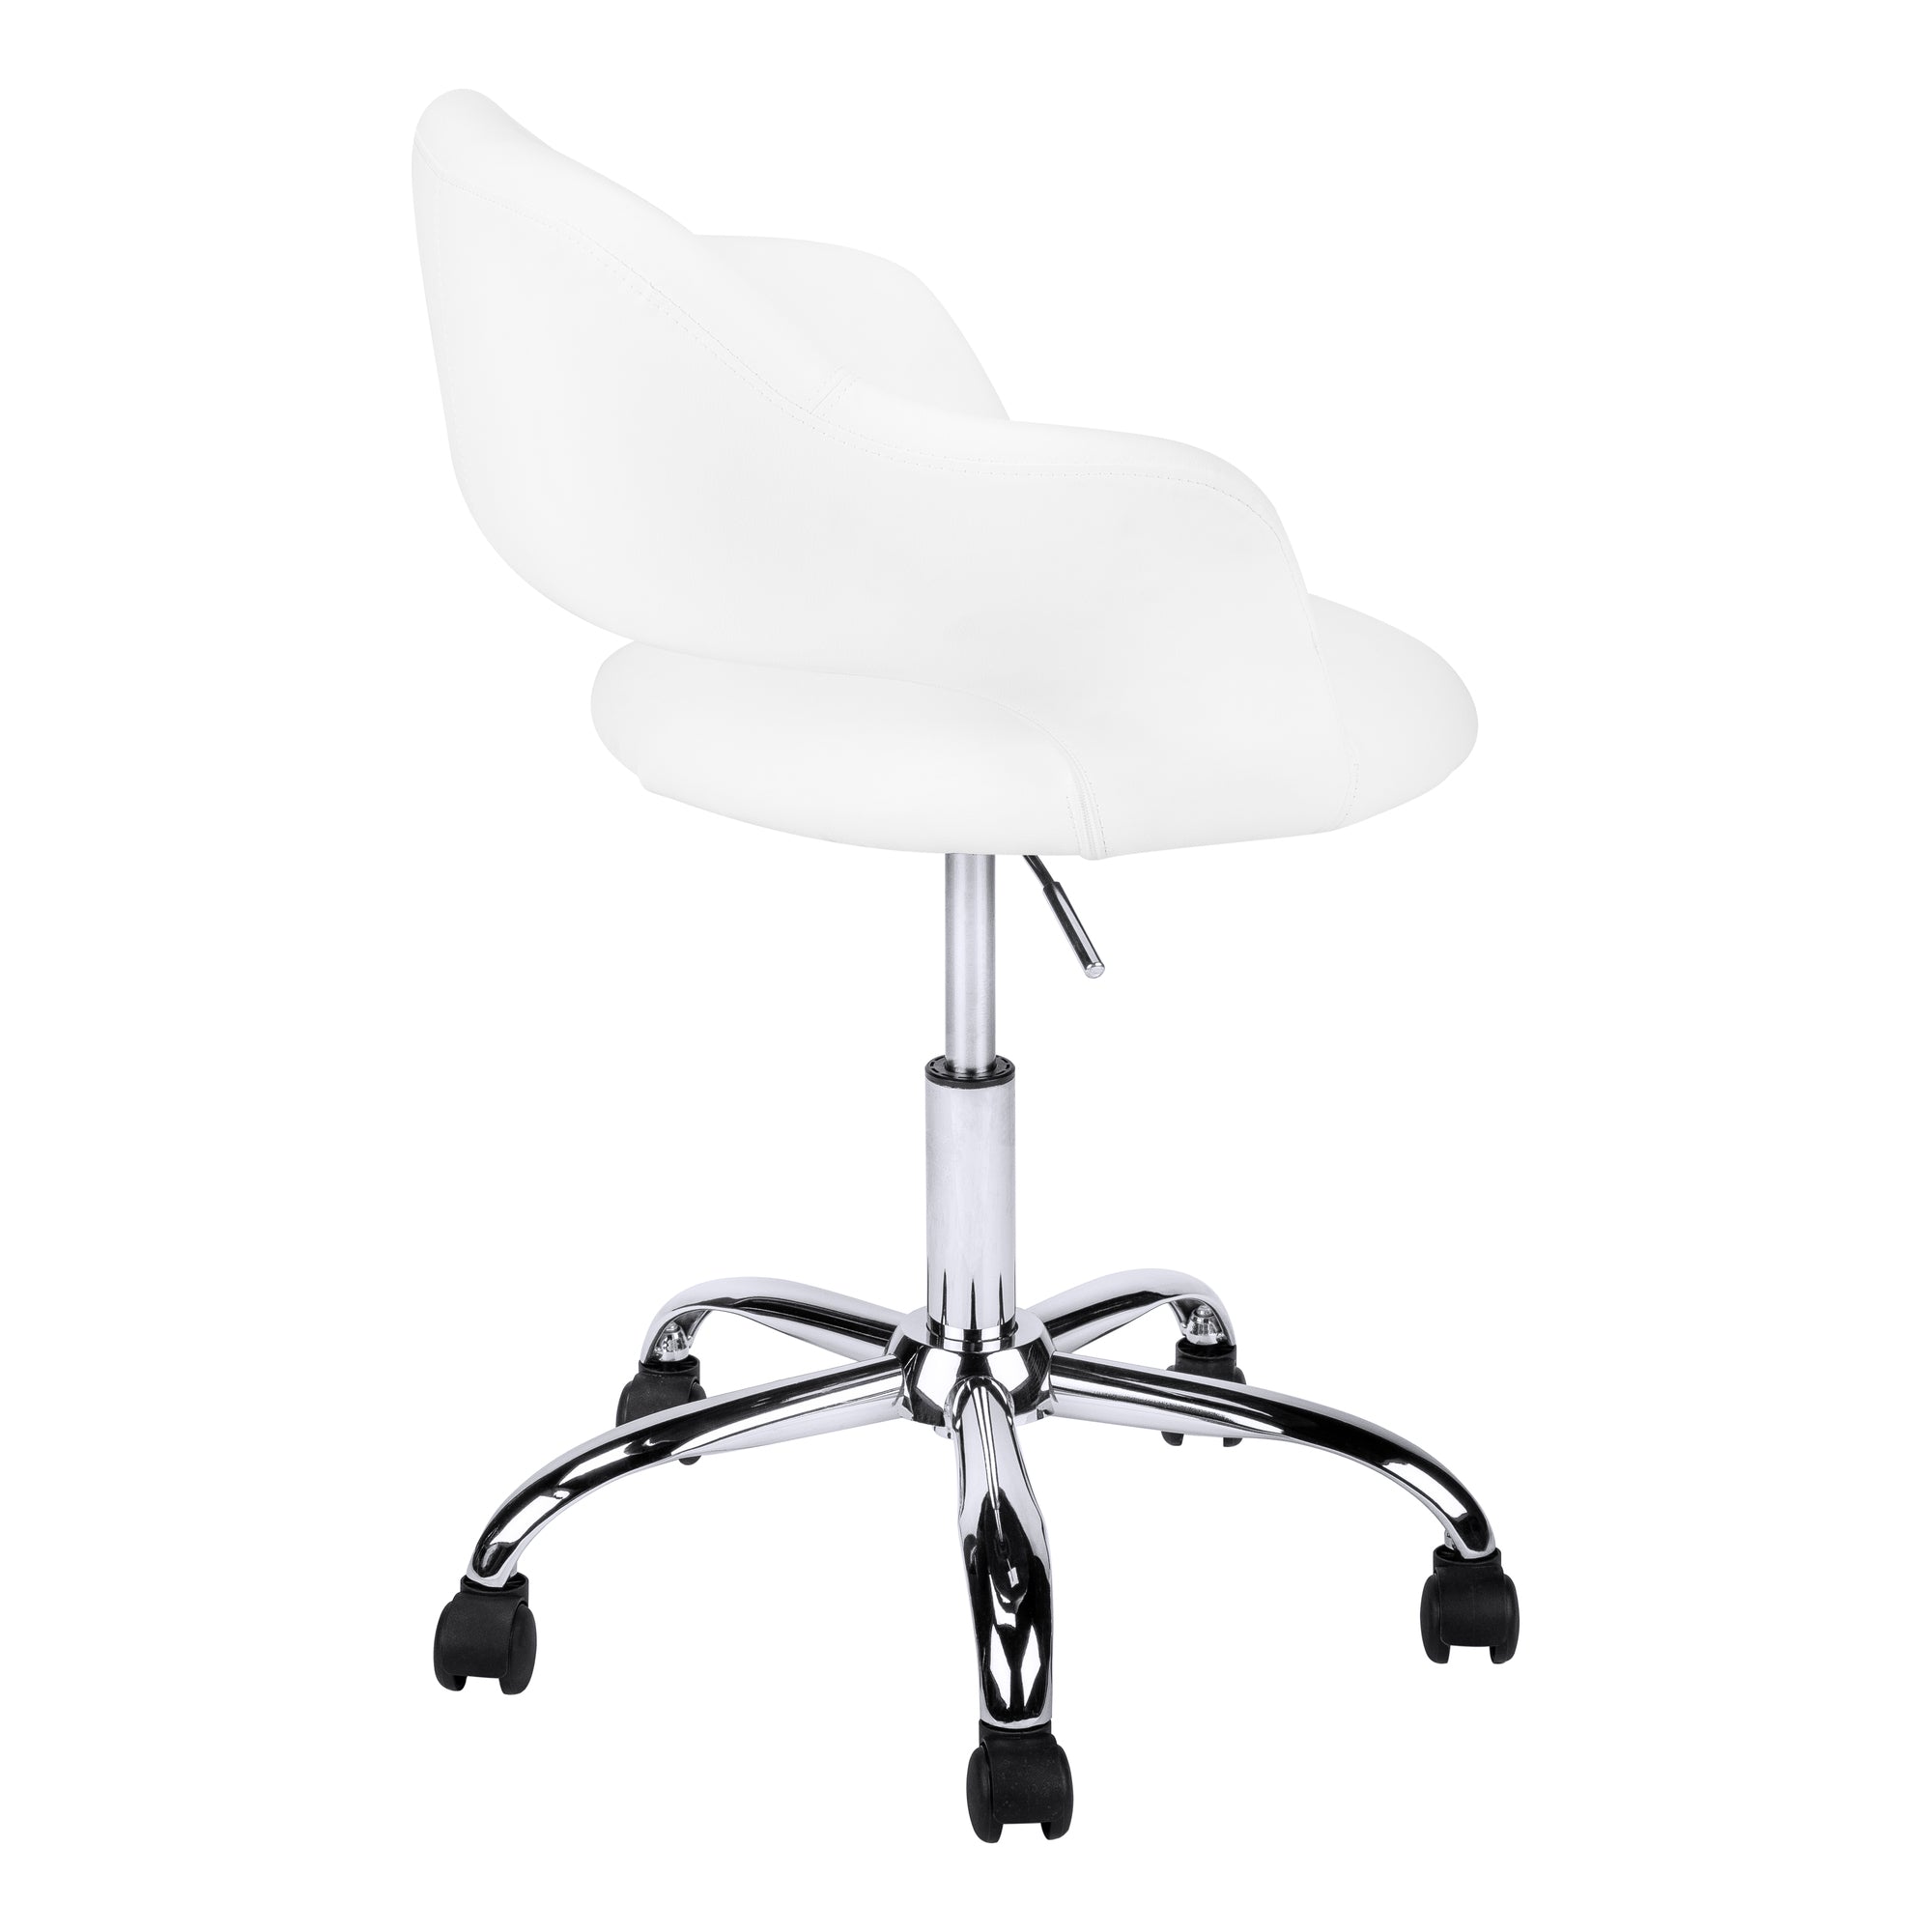 Office Chair - White / Chrome Metal Hydraulic Lift Base